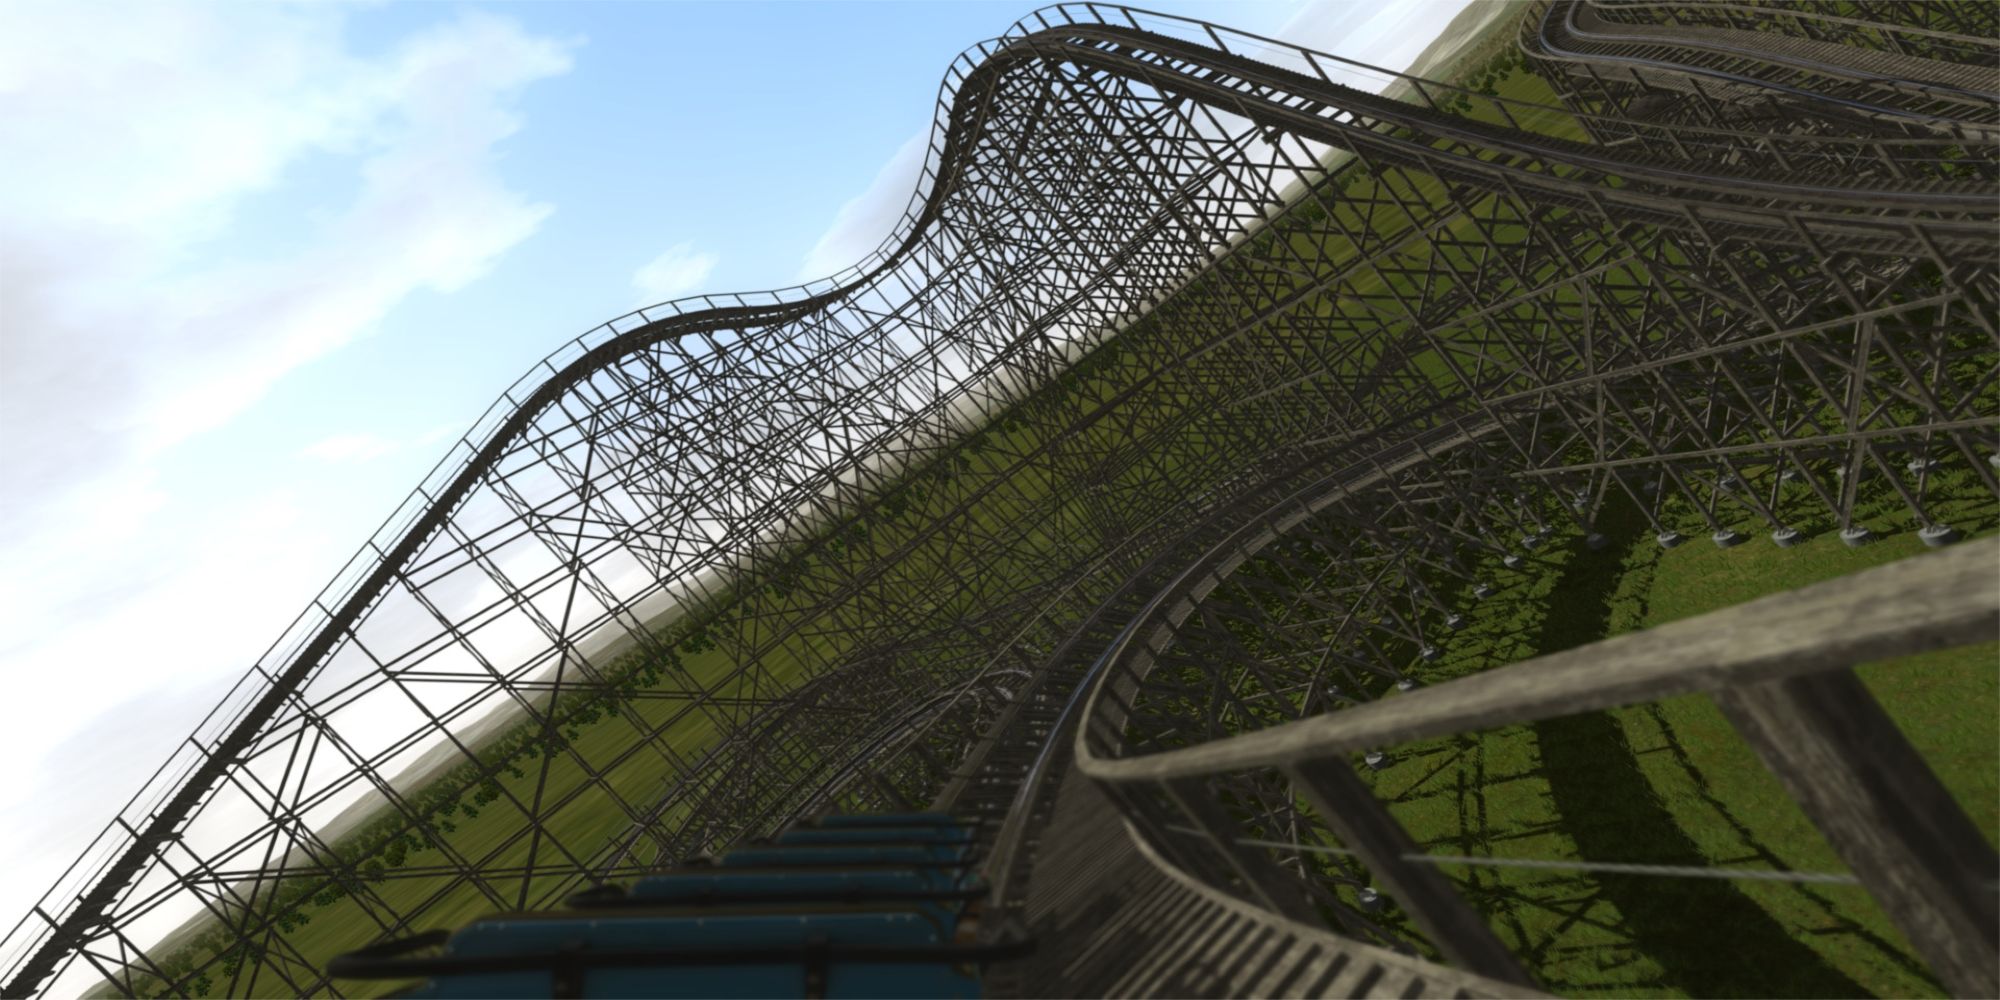 Wooden Roller Coaster From NoLimits 2 Roller Coaster Simulation